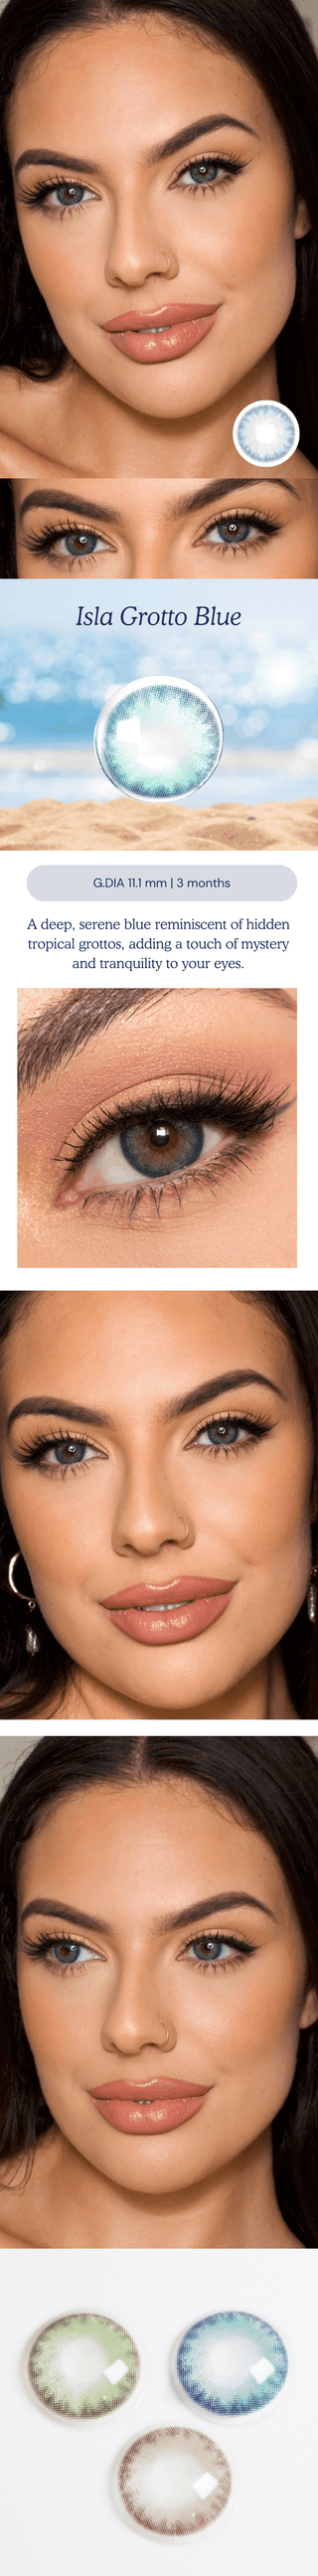 Various angles of a model wearing the Isla Grotto Blue contact lens color. A closeup of a model's eyes wearing the blue lens, showing the natural yet noticeable transformation on dark eyes.